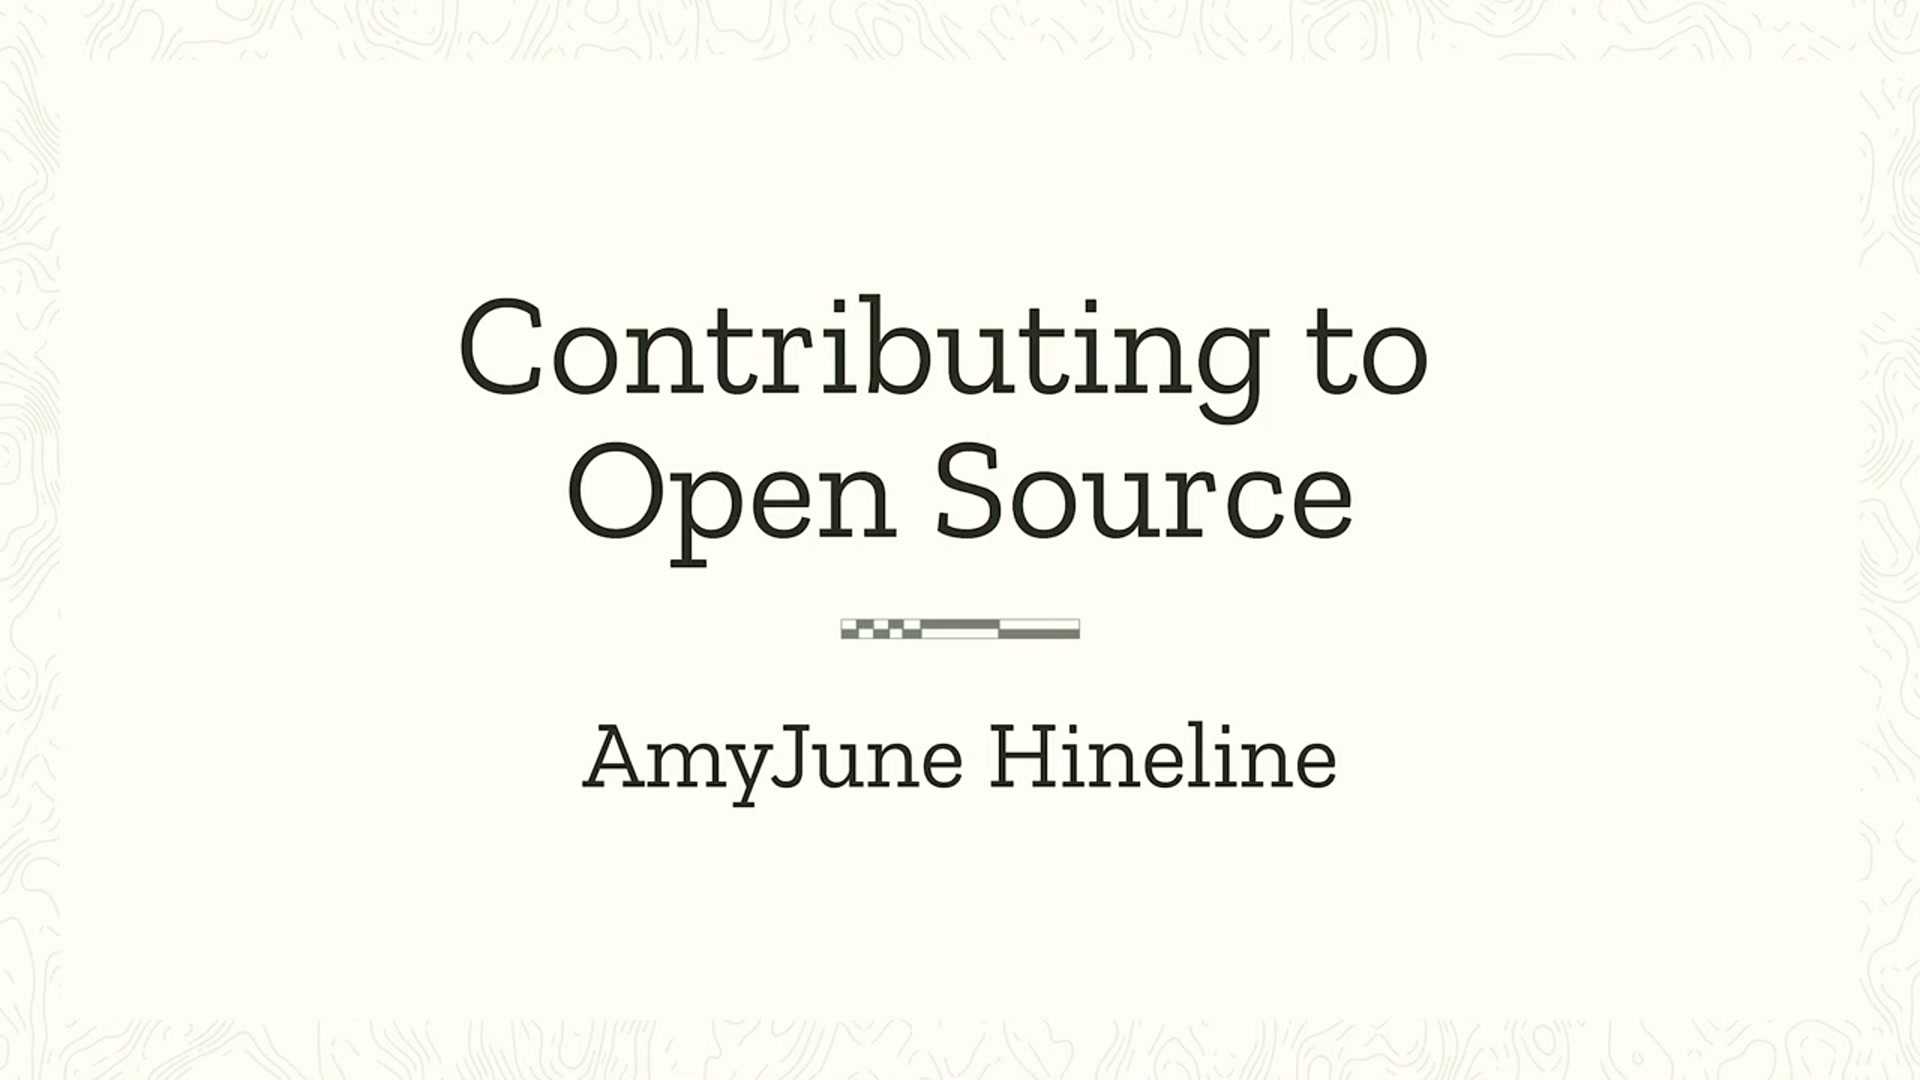 AmyJune Hineline: Contributing to Open Source